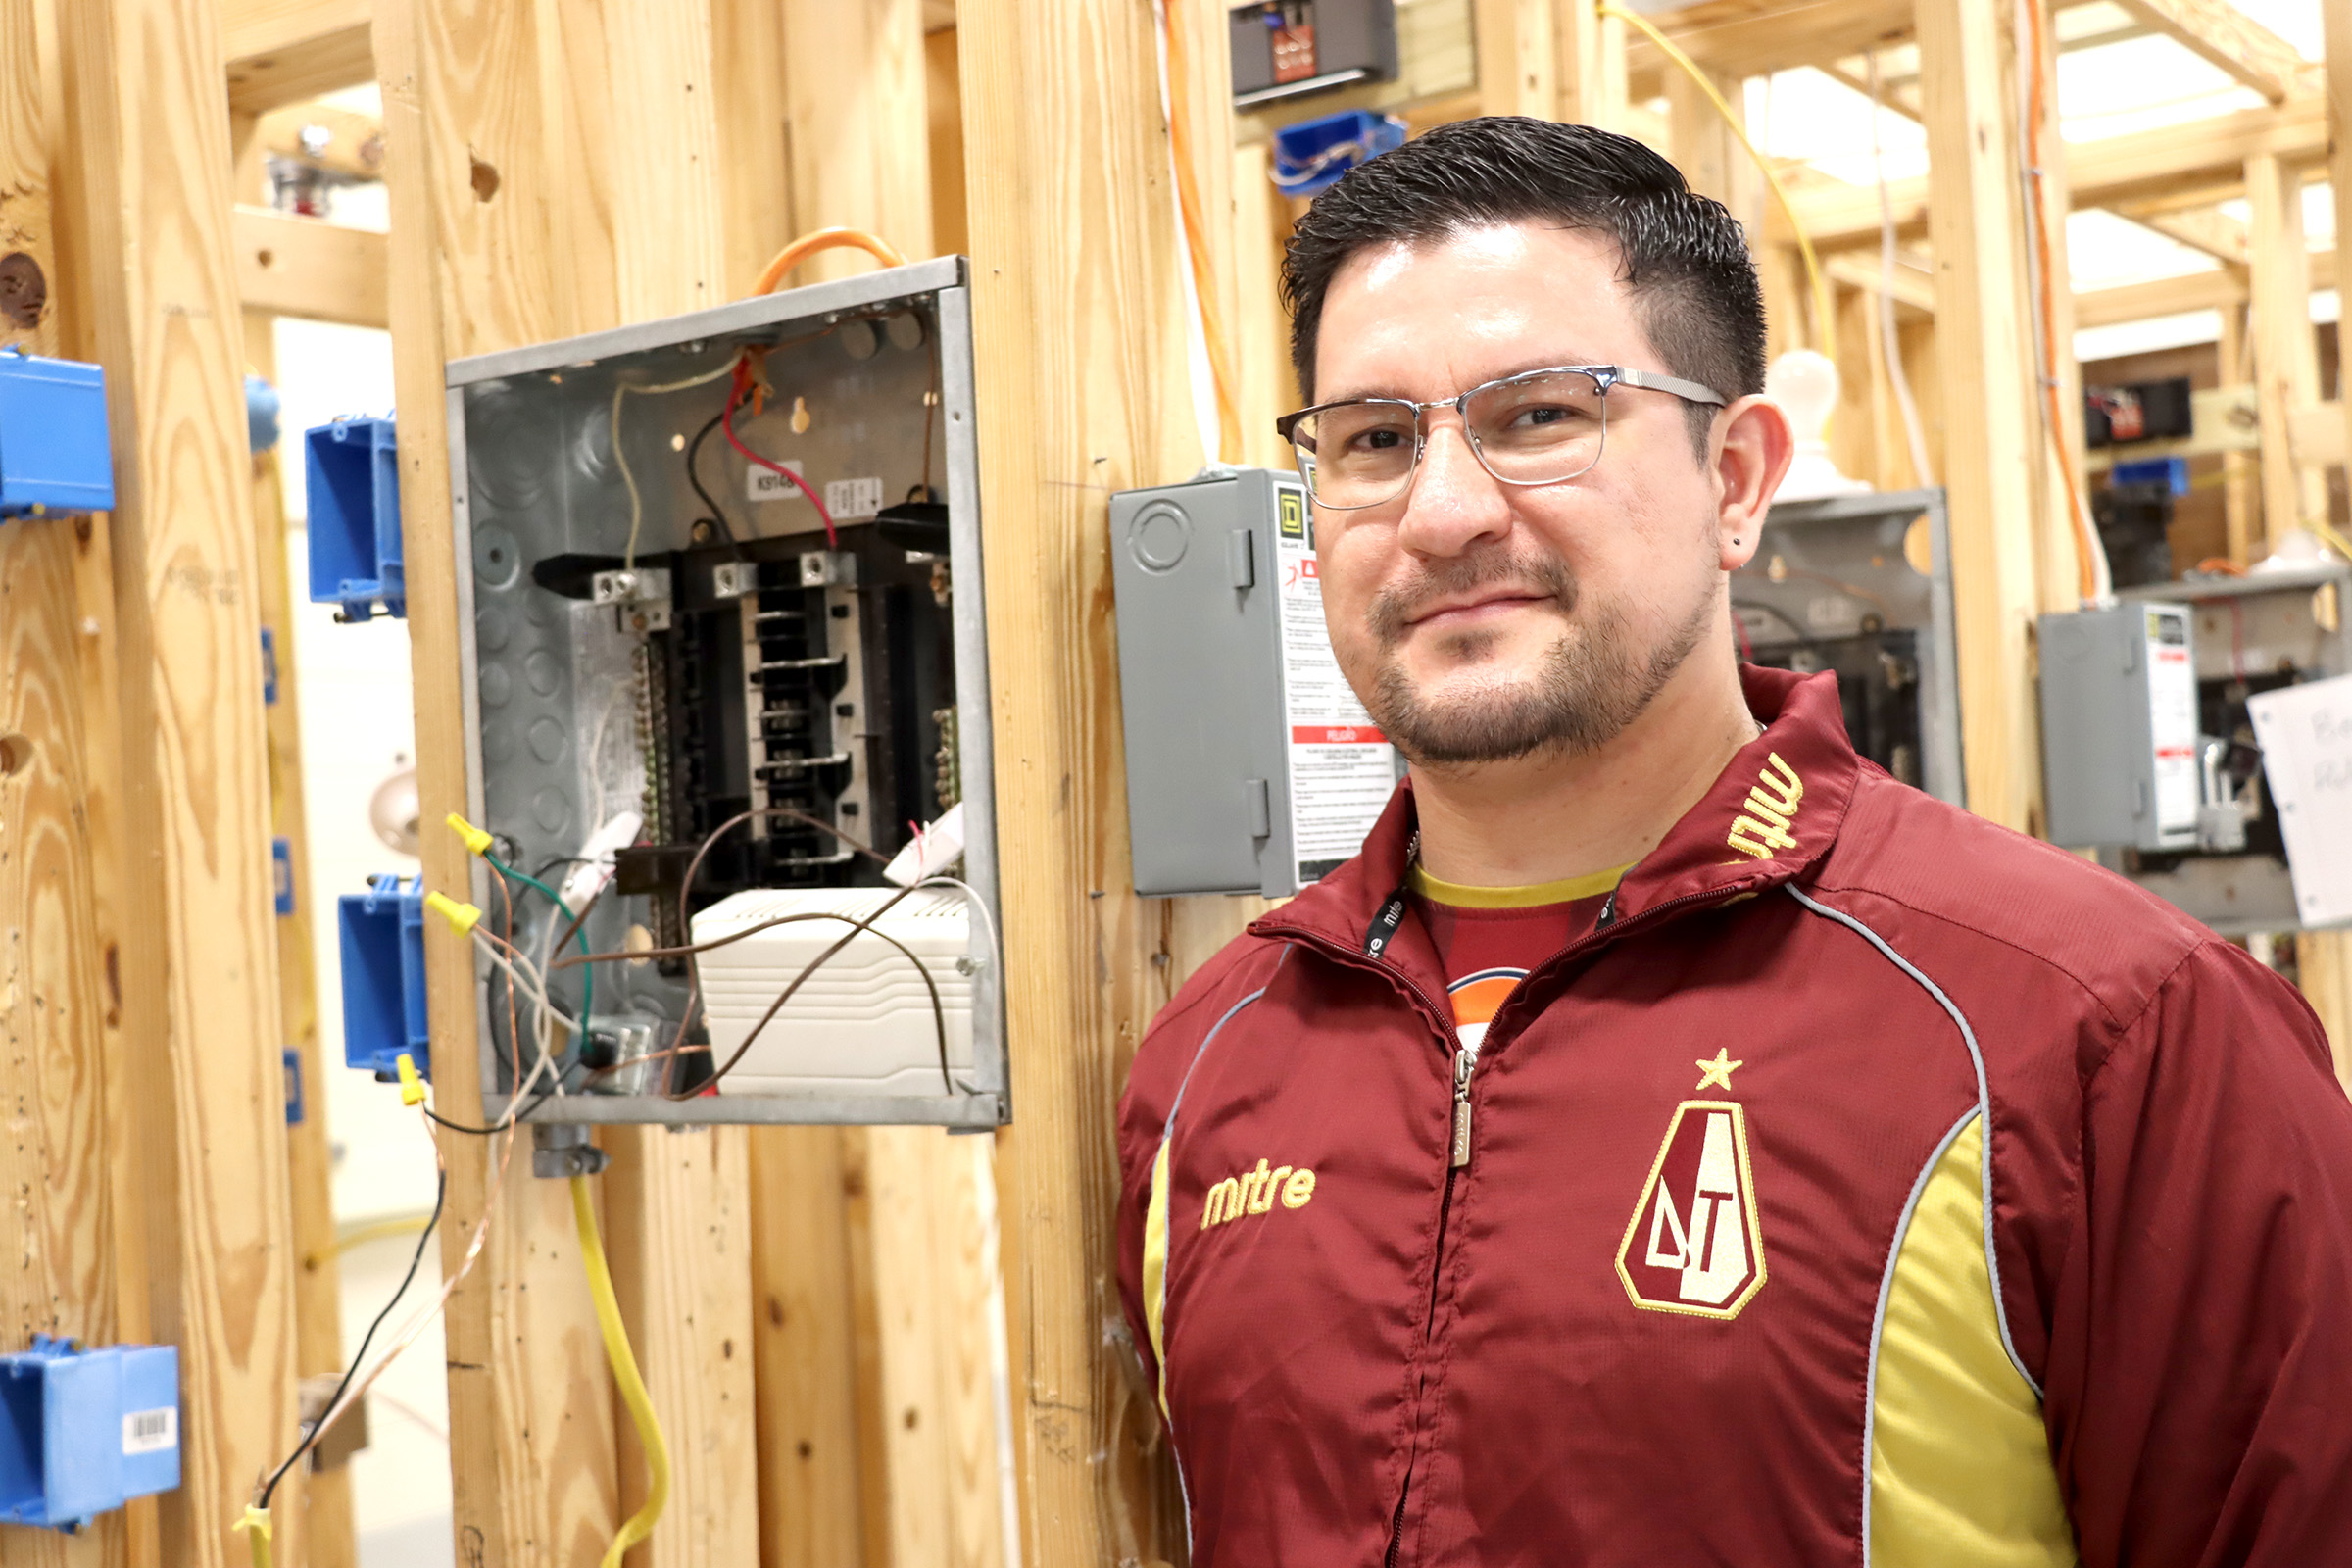 Giovanni Pena is a student in the Electrical Tech Program at Harrison County Campus. The building behind him is a project that students are working on to give them a feel for wiring a whole house.